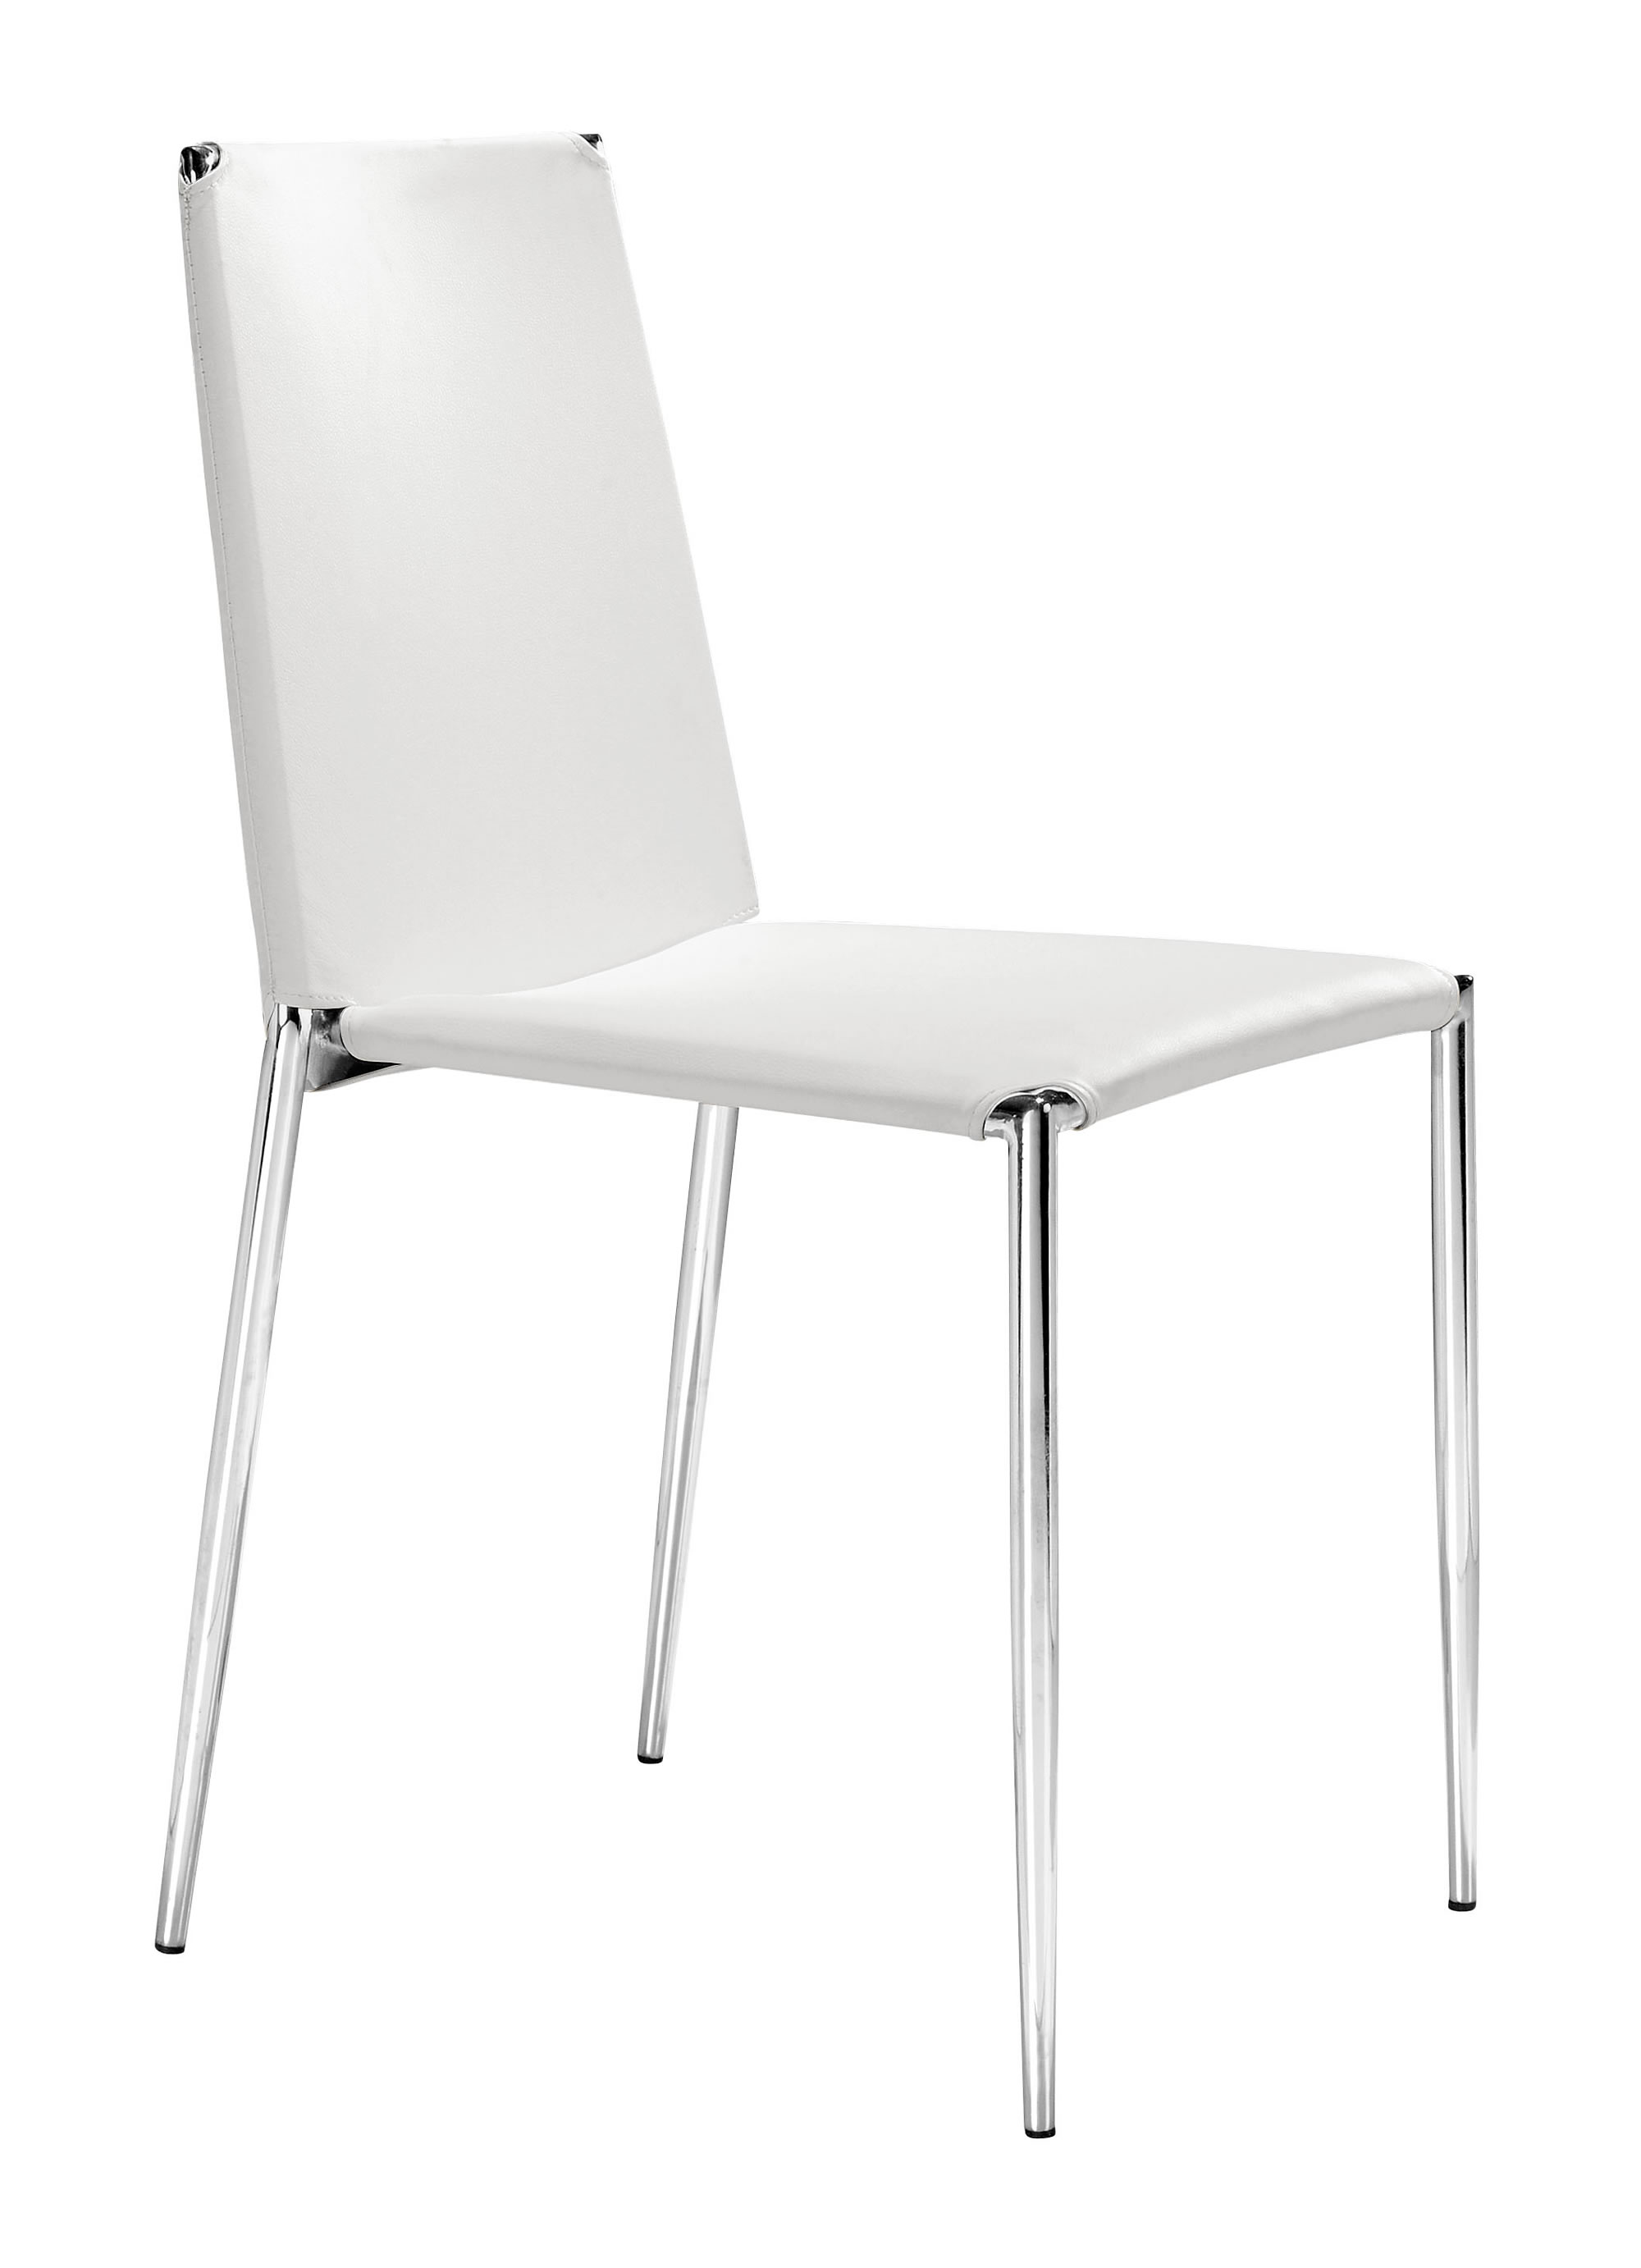 Soft White Leatherette and Chrome Stacking Dining Chairs Set of 4